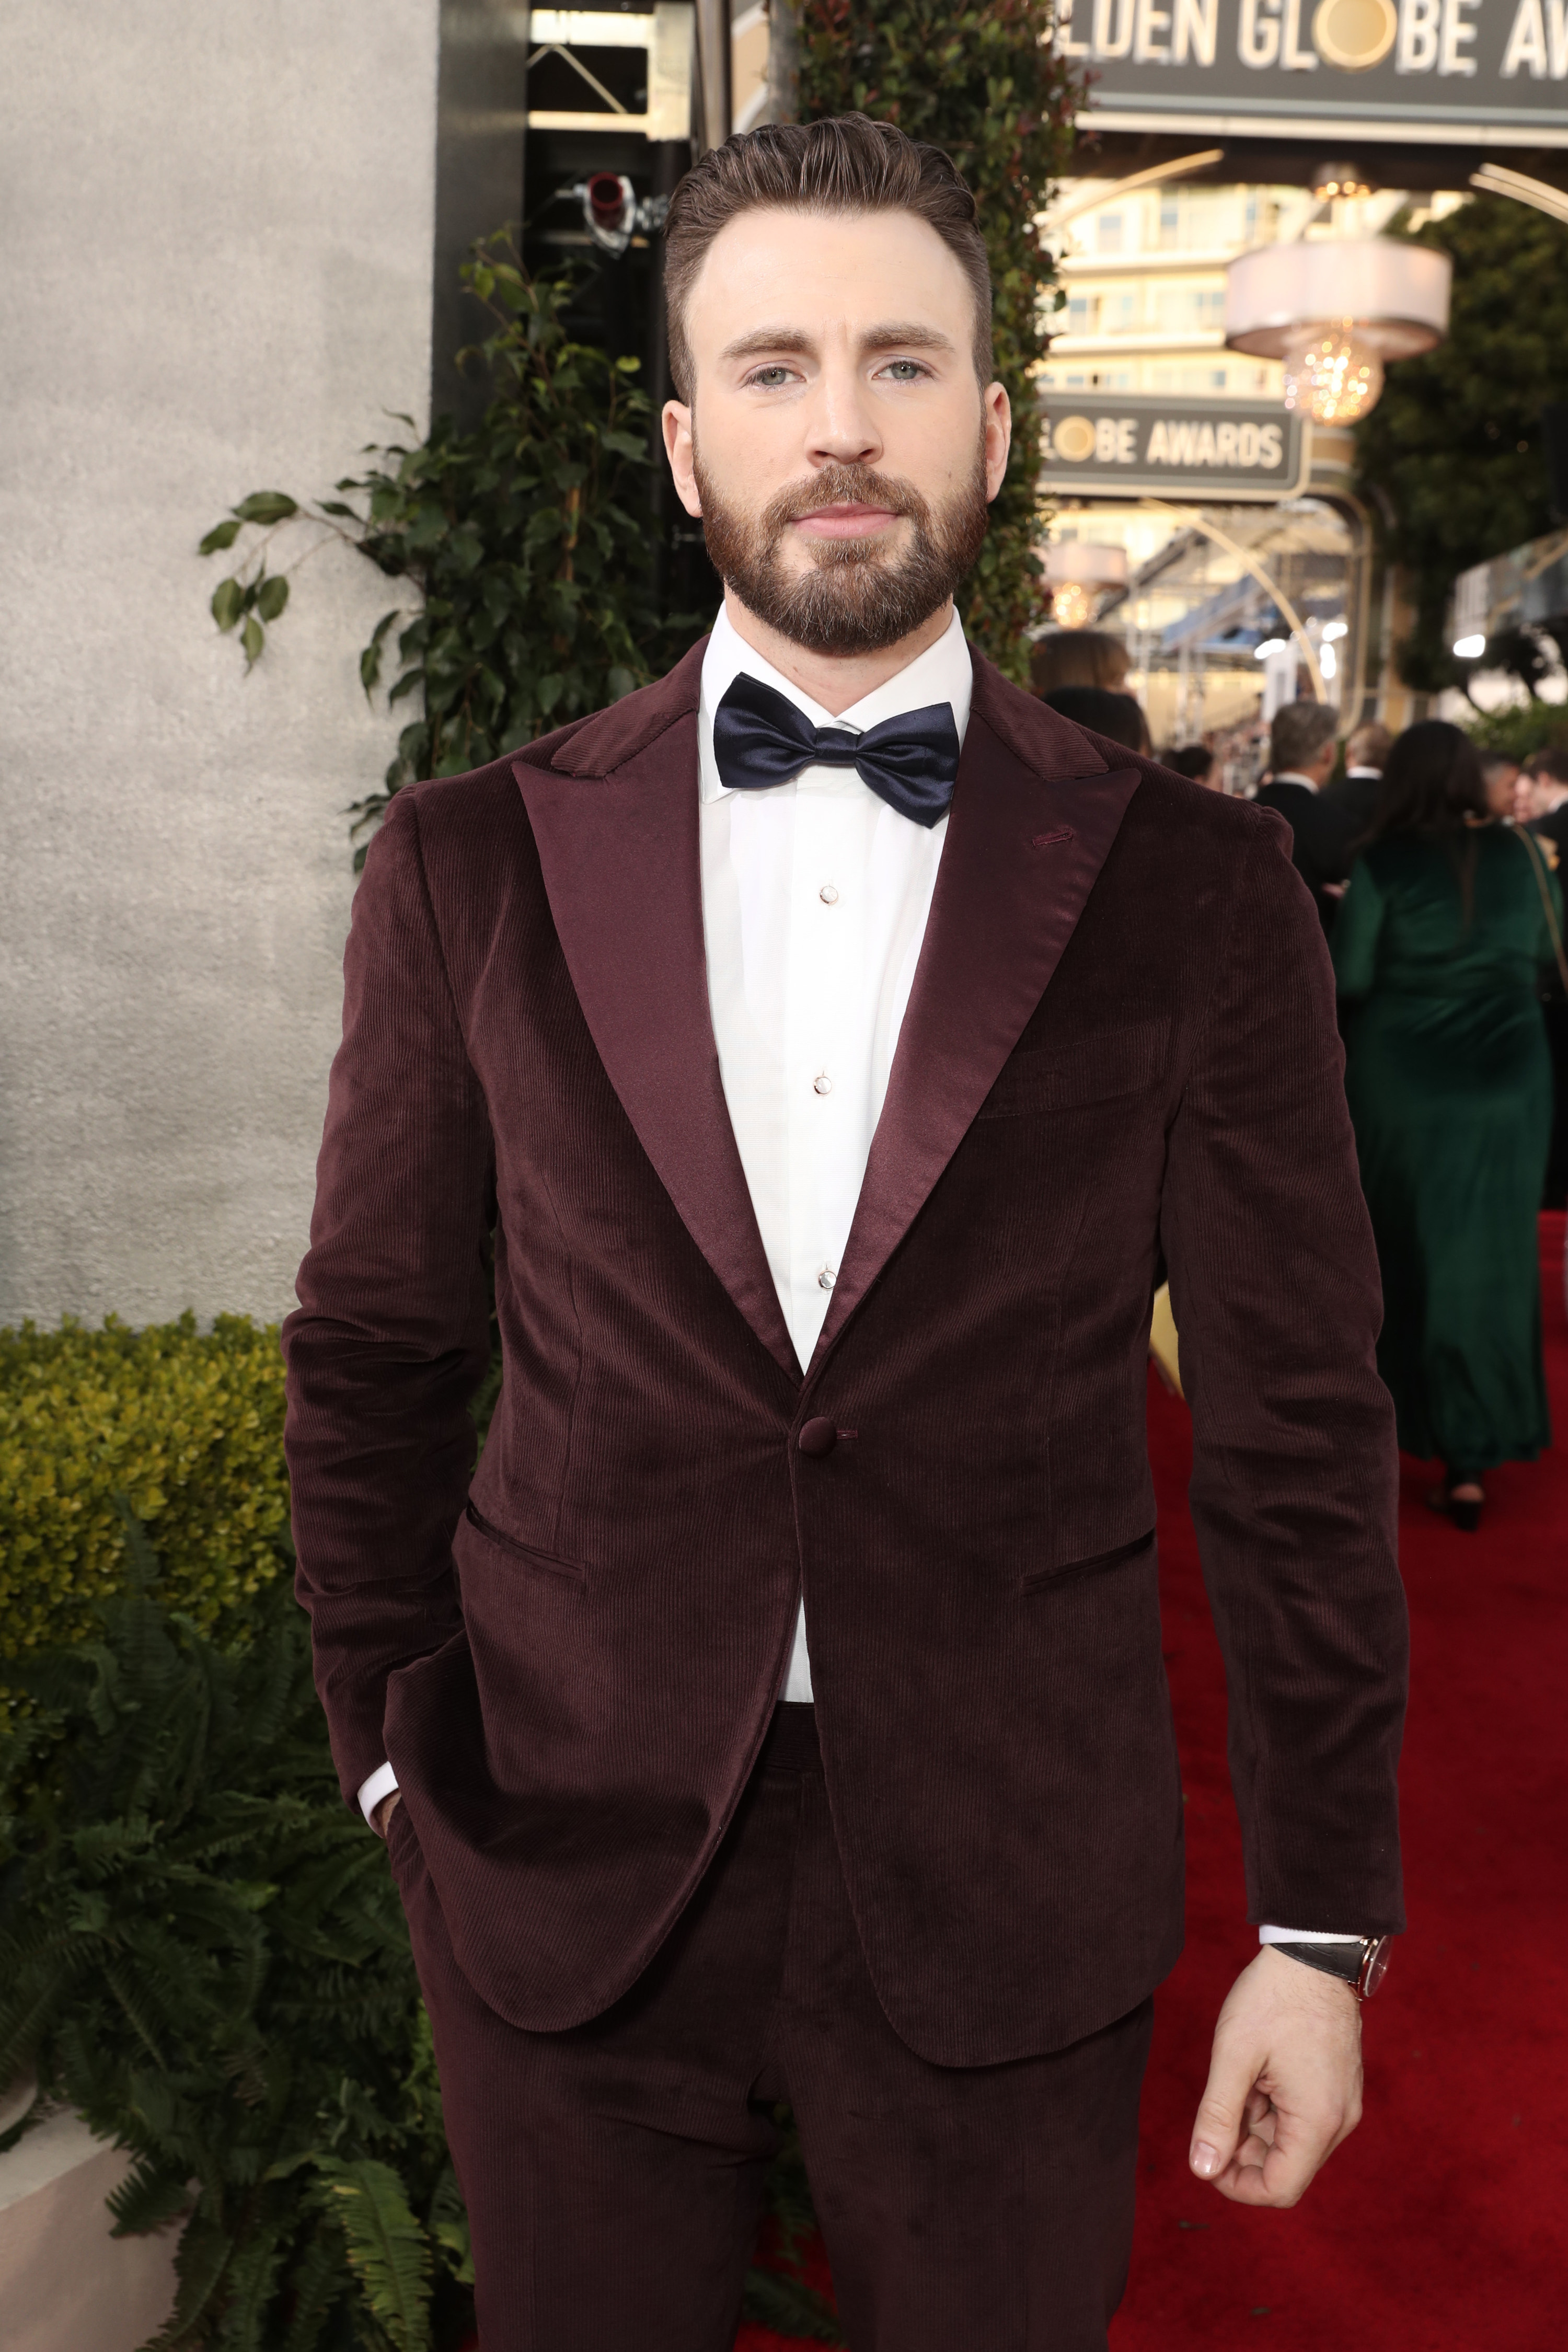 Chris poses with his hand in his pocket while wearing a suit